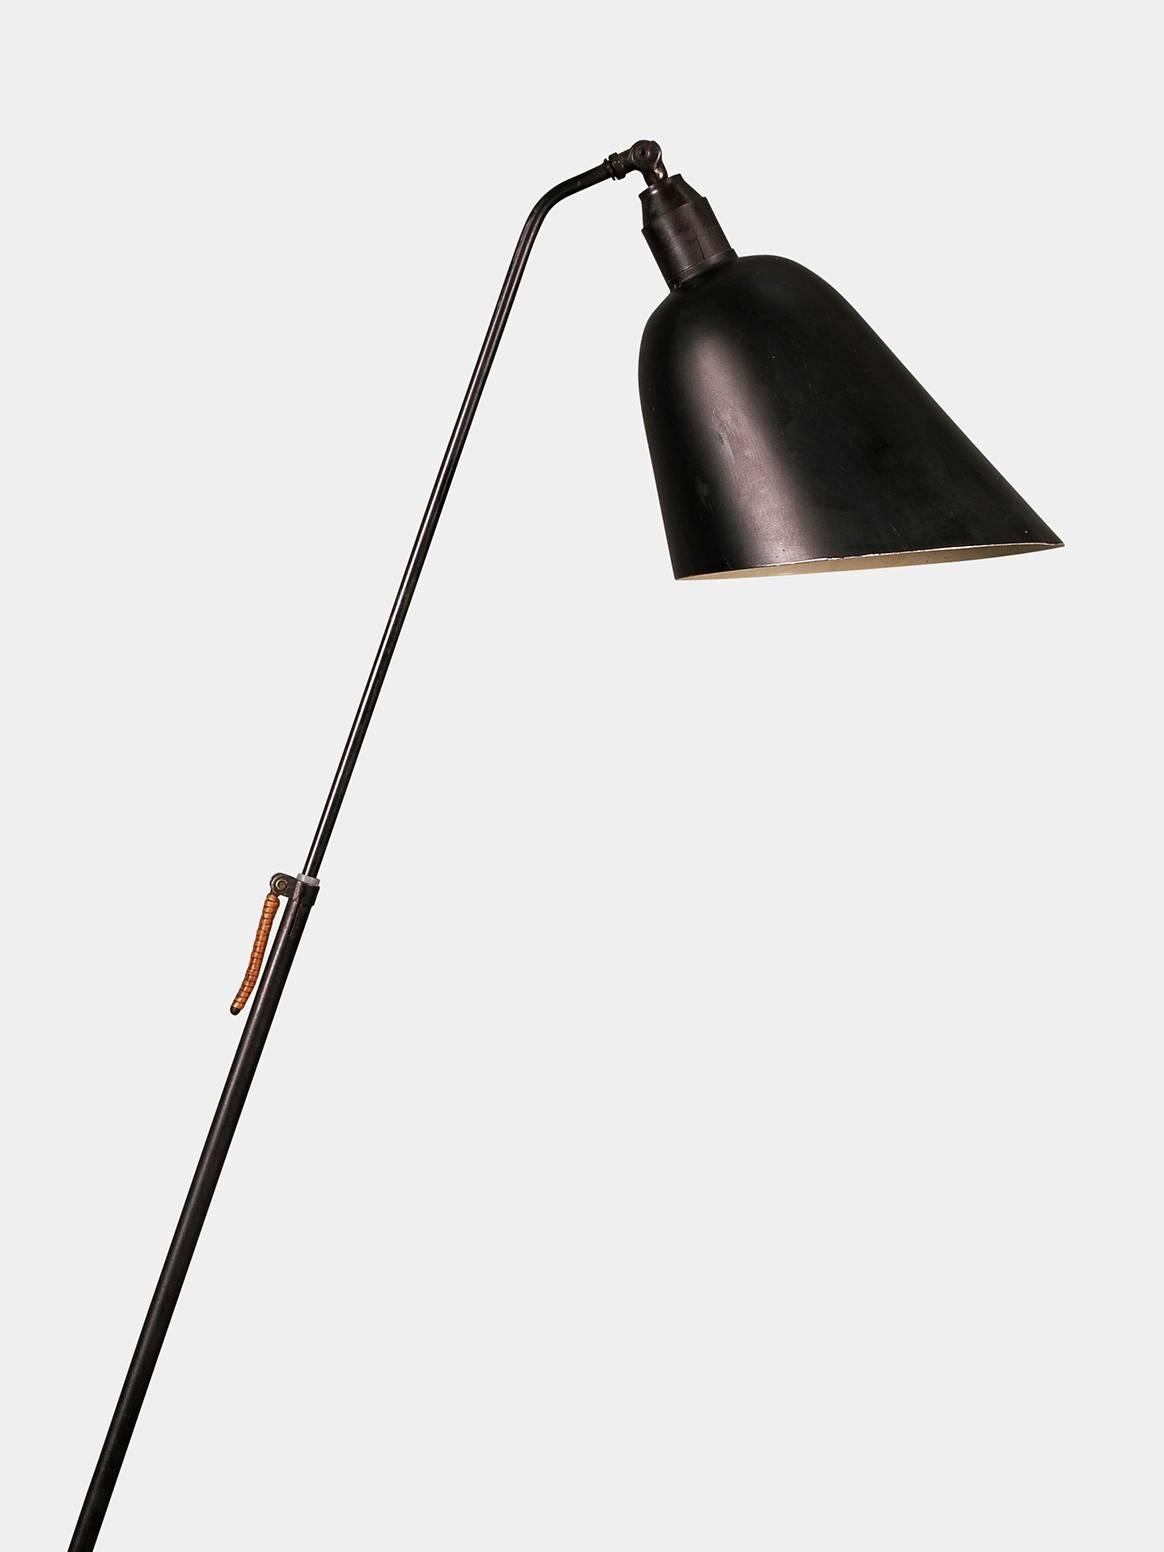 Danish floor lamp from the midcentury - original and in a beautiful condition. 

Black lacquered shade and stand with woven cane details and adjustable height. 

Designed and manufactured in the 1950s. 

 